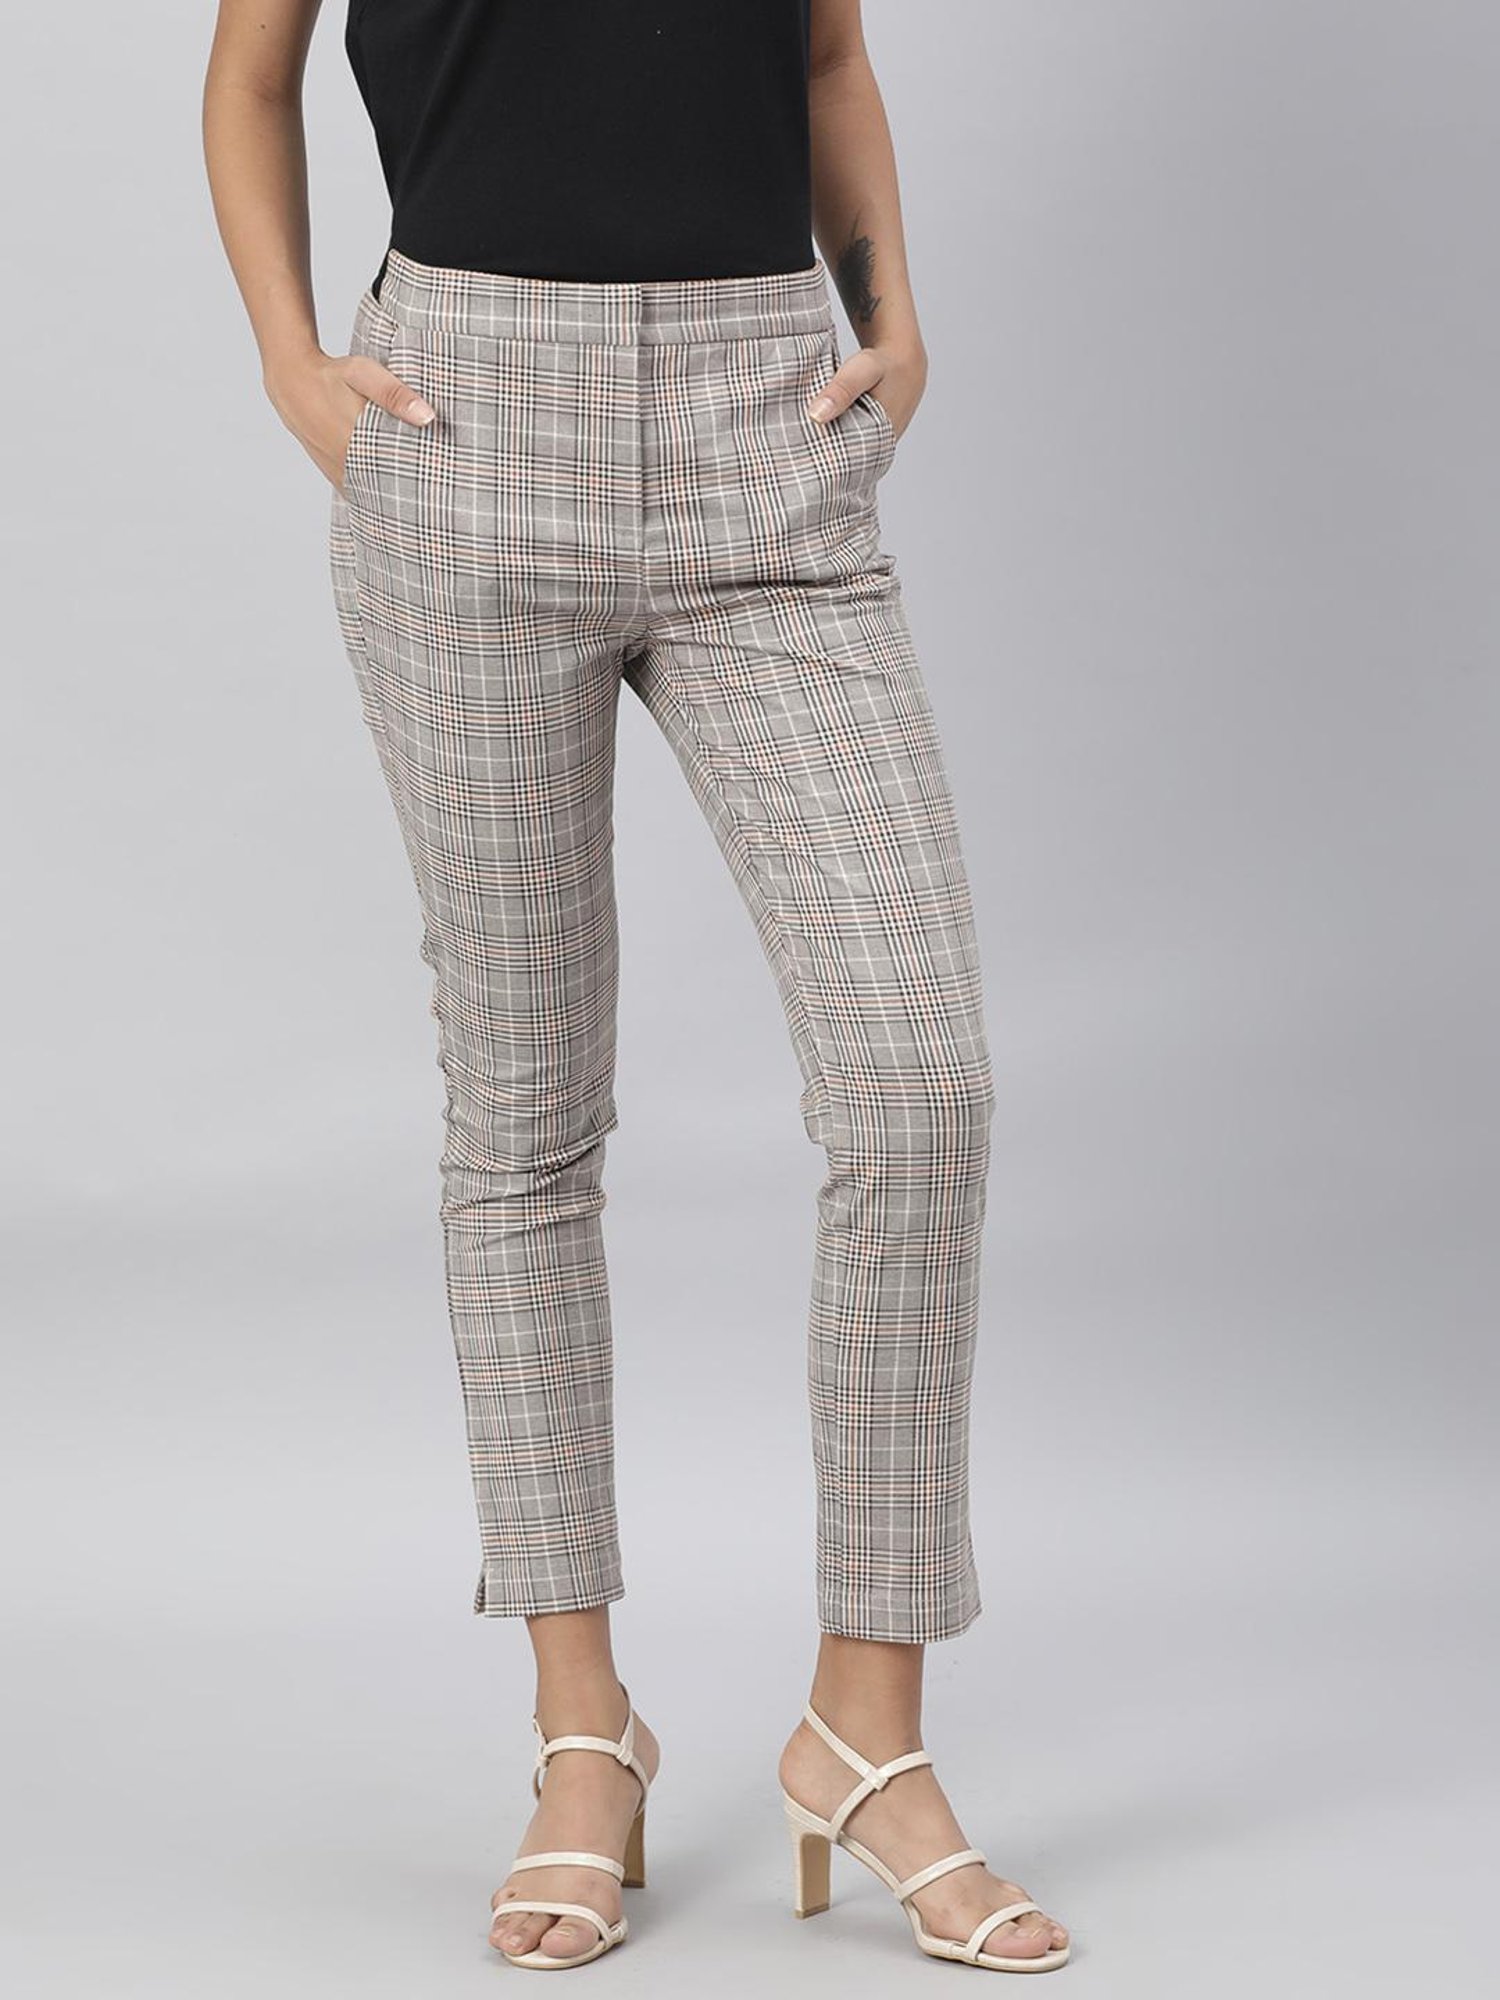 Buy GREY Trousers & Pants for Women by Annabelle by Pantaloons Online |  Ajio.com